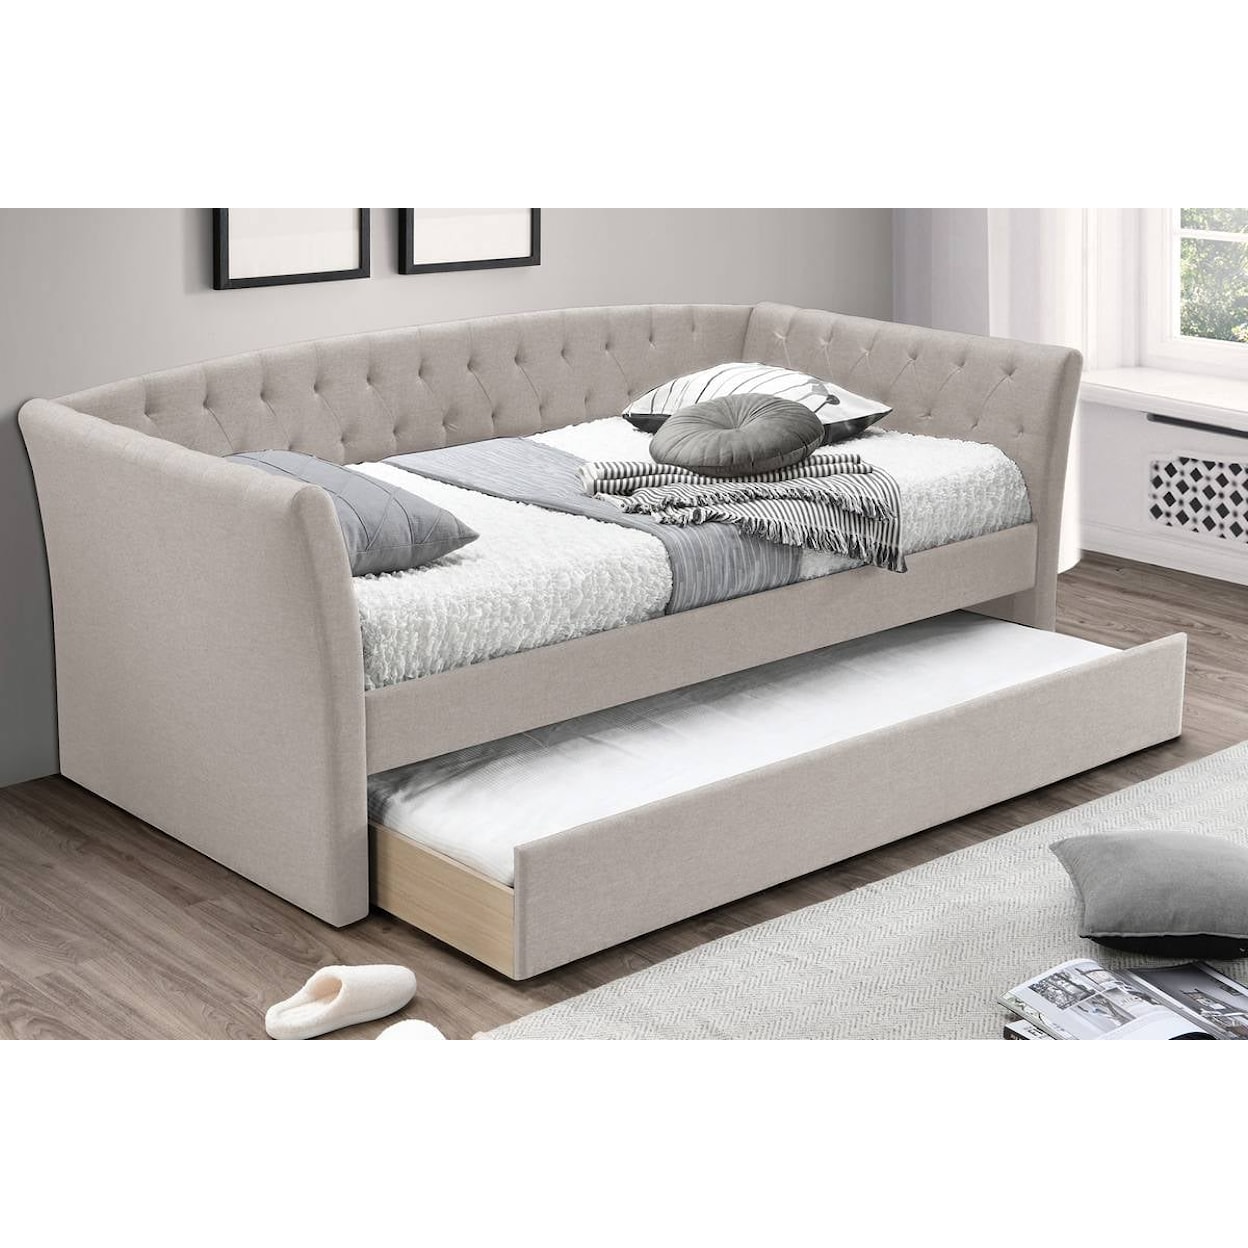 Poundex Day Beds FLAIR BEIGE DAYBED |